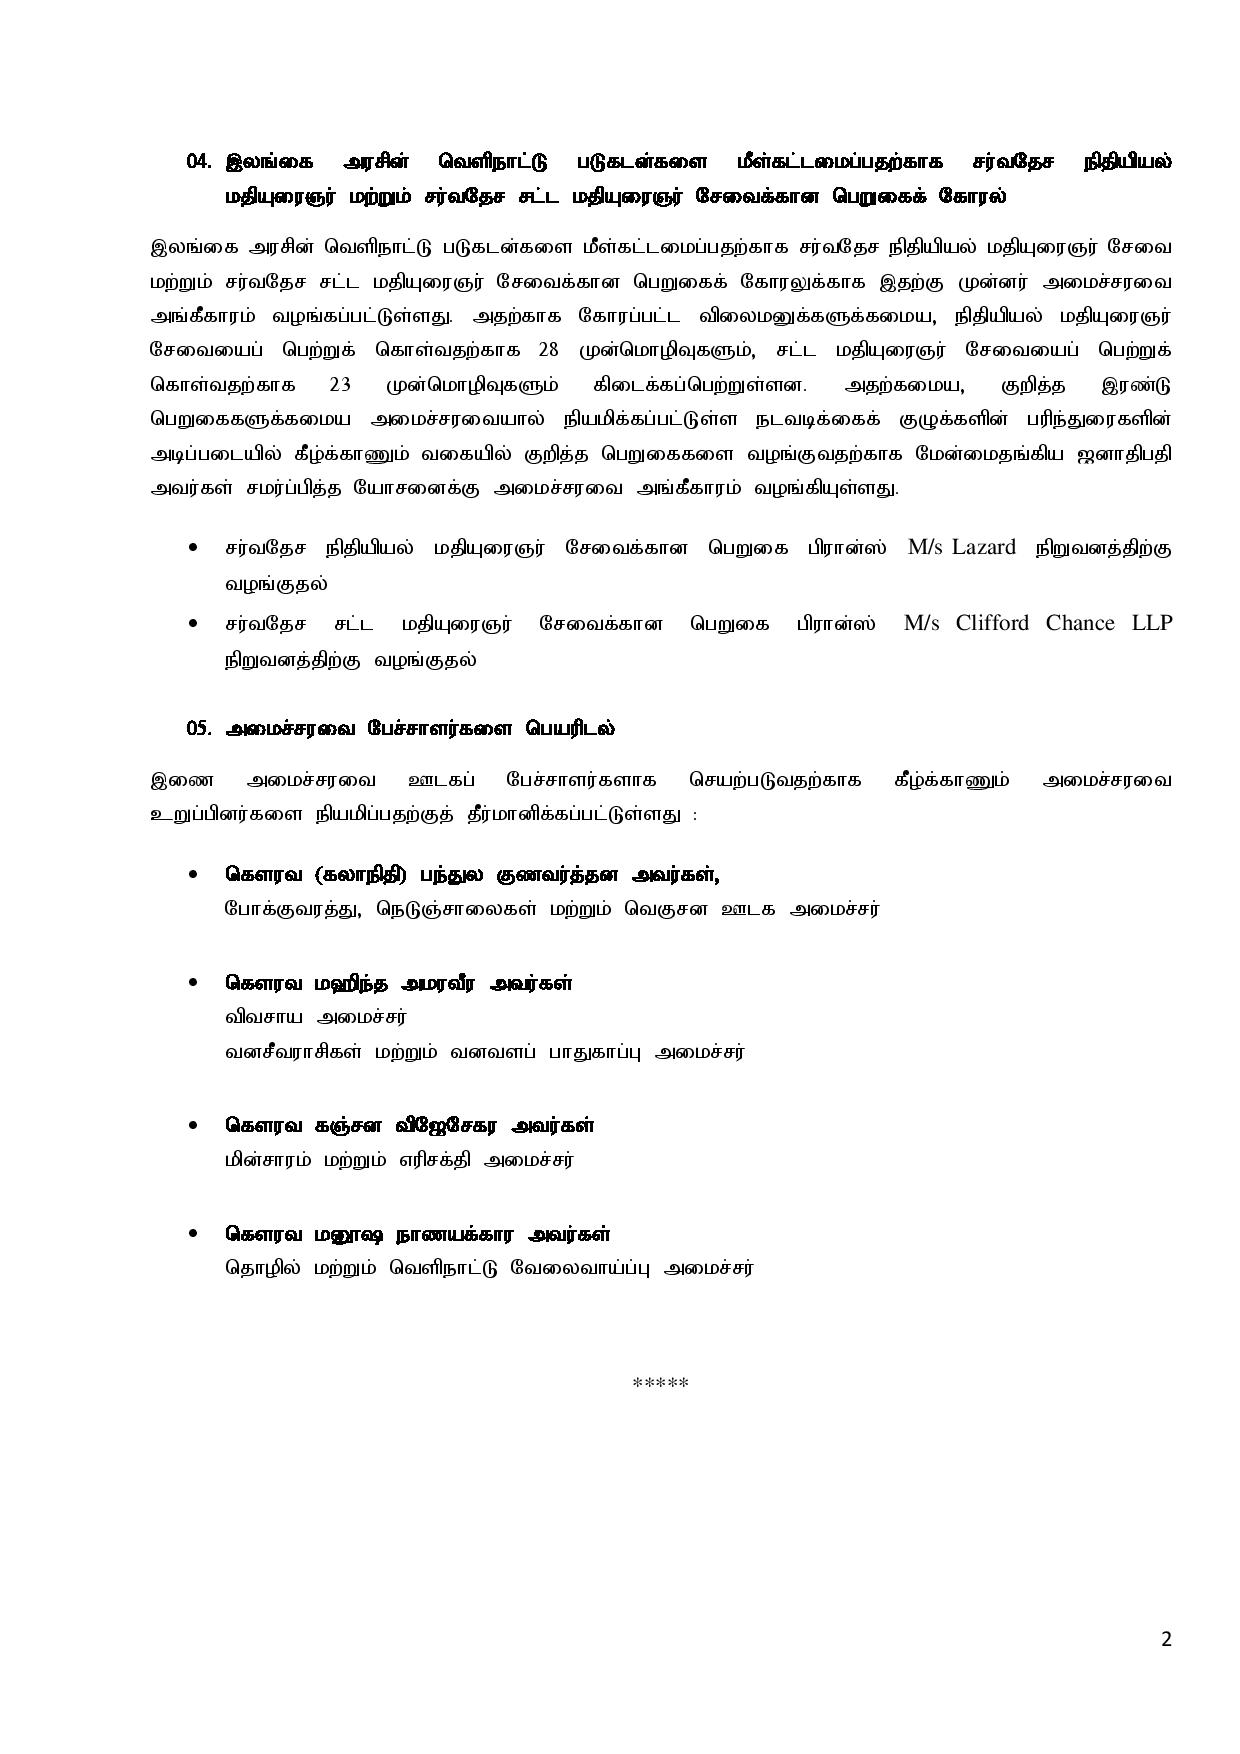 Cabinet Decisions on 23.05.2022 Tamil page 002